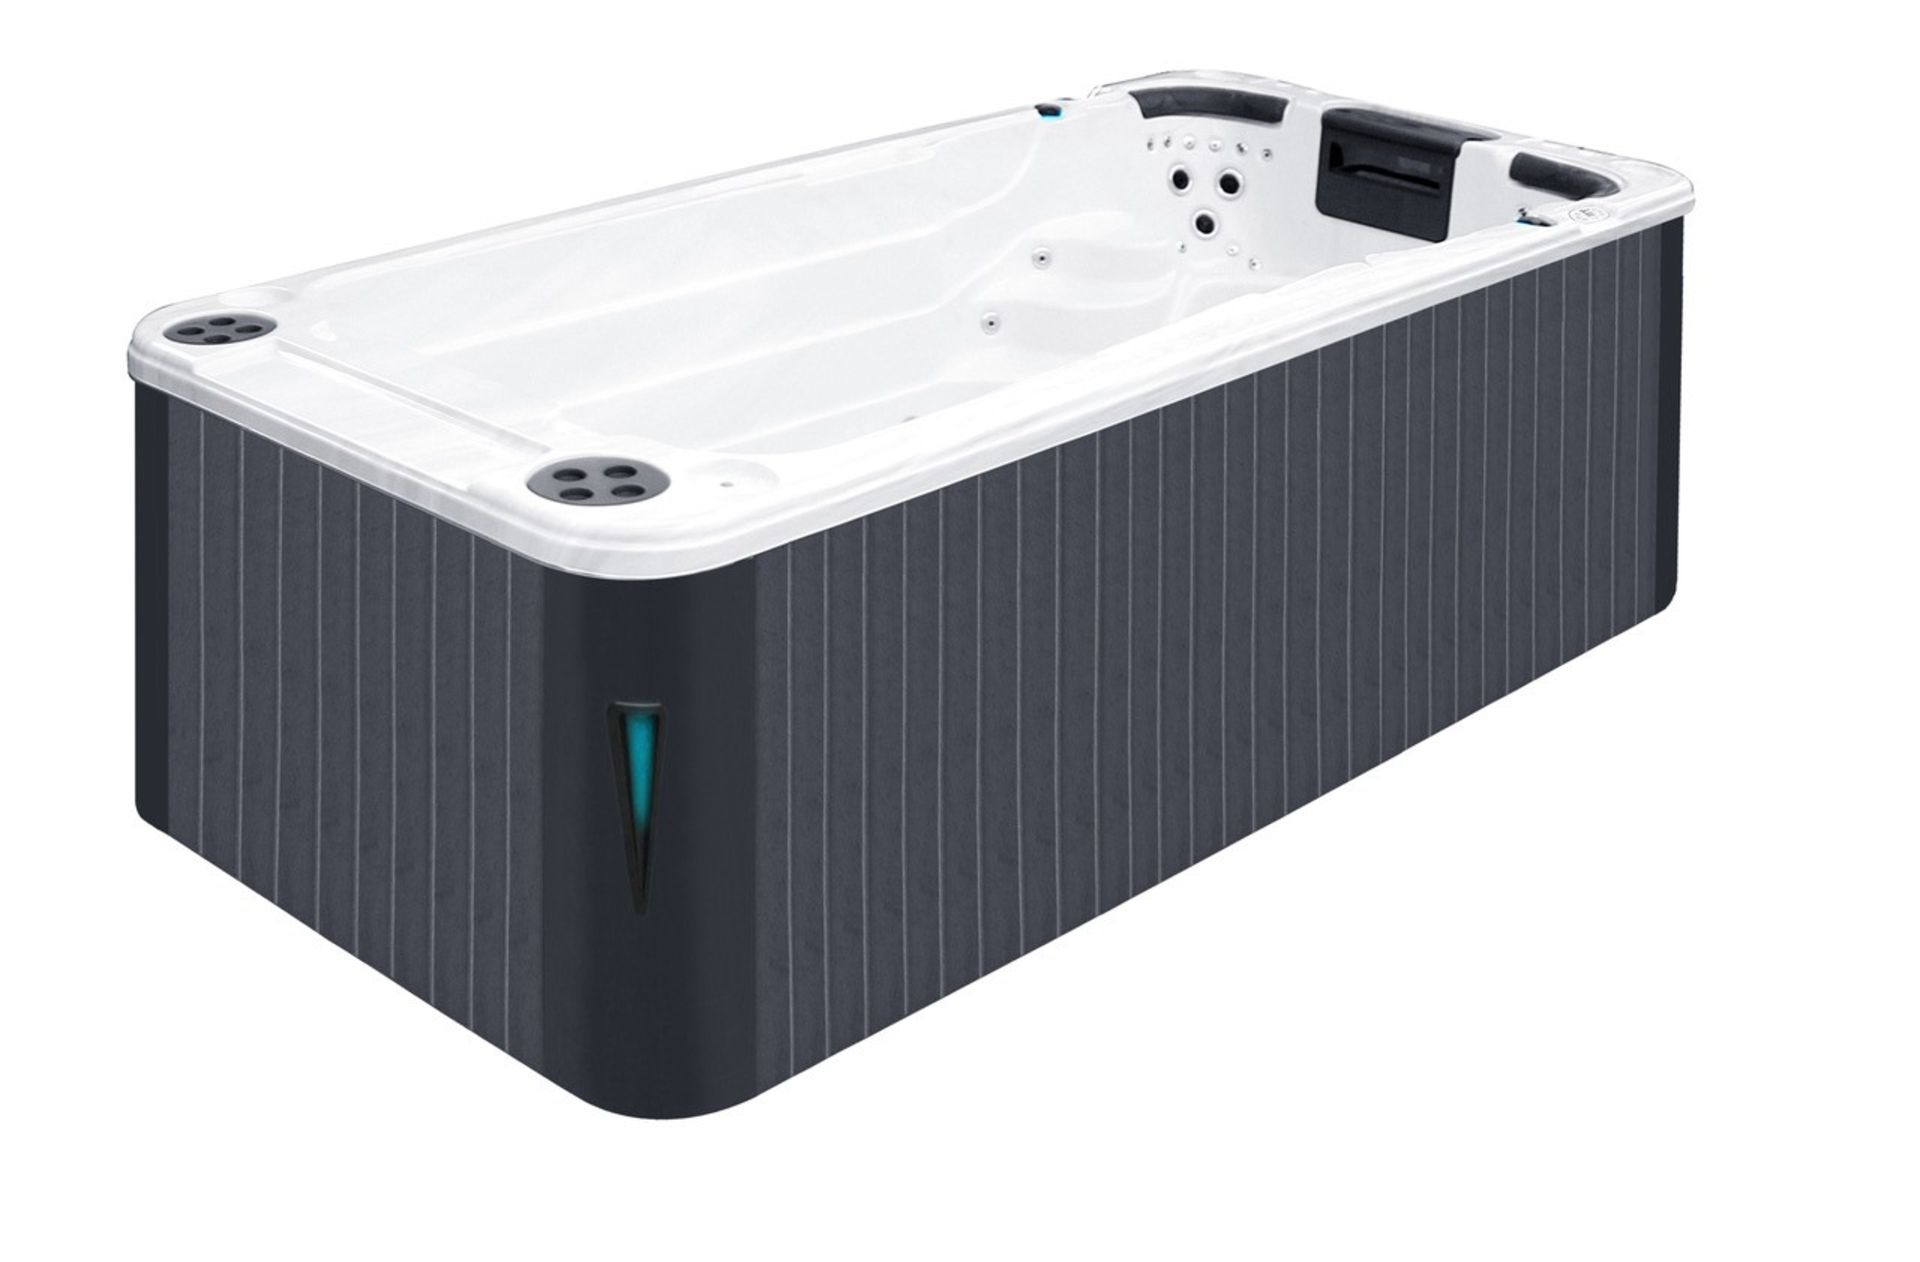 1 x Passion Spa Aquatic 2 Swim Spa - Brand New With Warranty - RRP: £20,500 - CL774 - Location: - Image 2 of 4